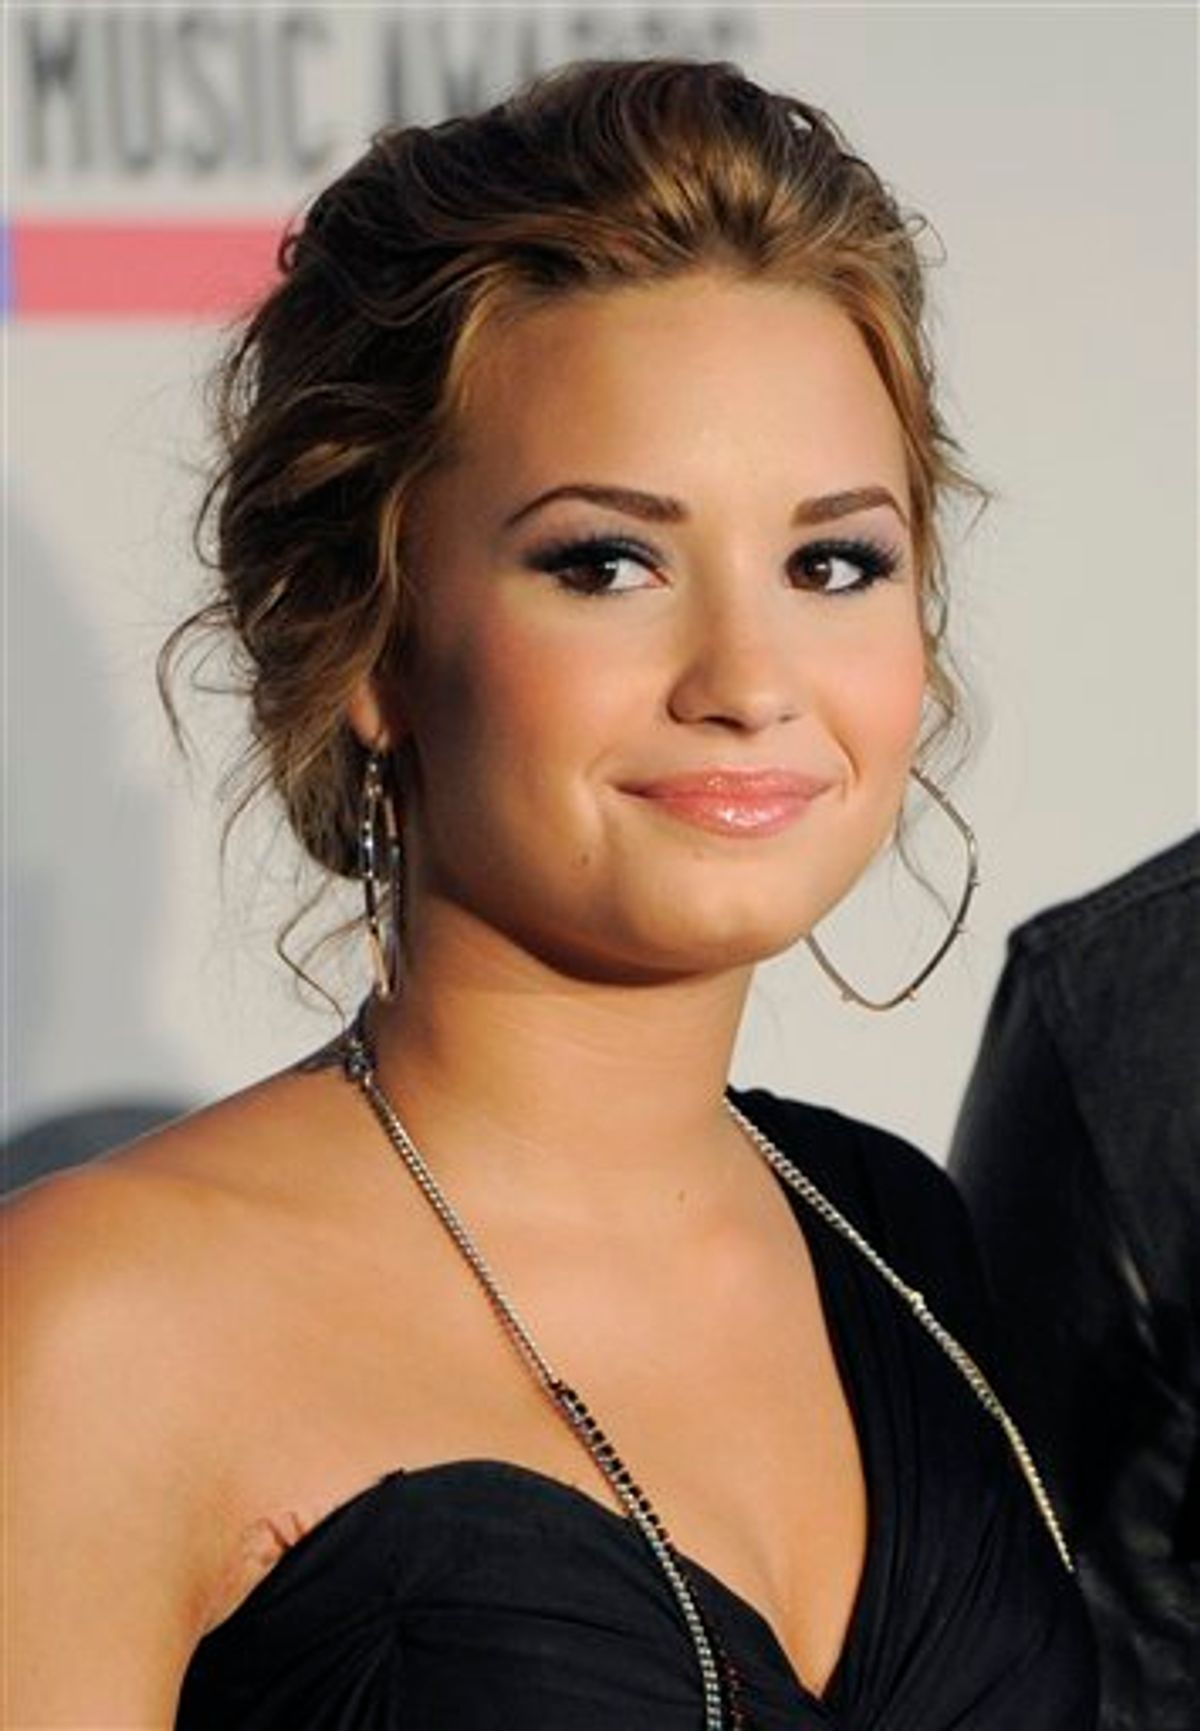 FILE - In this Oct. 12, 2010, Demi Lovato is pictured during nominations for the 2010 American Music Awards, in Los Angeles.   (AP Photo/Chris Pizzello) (AP)